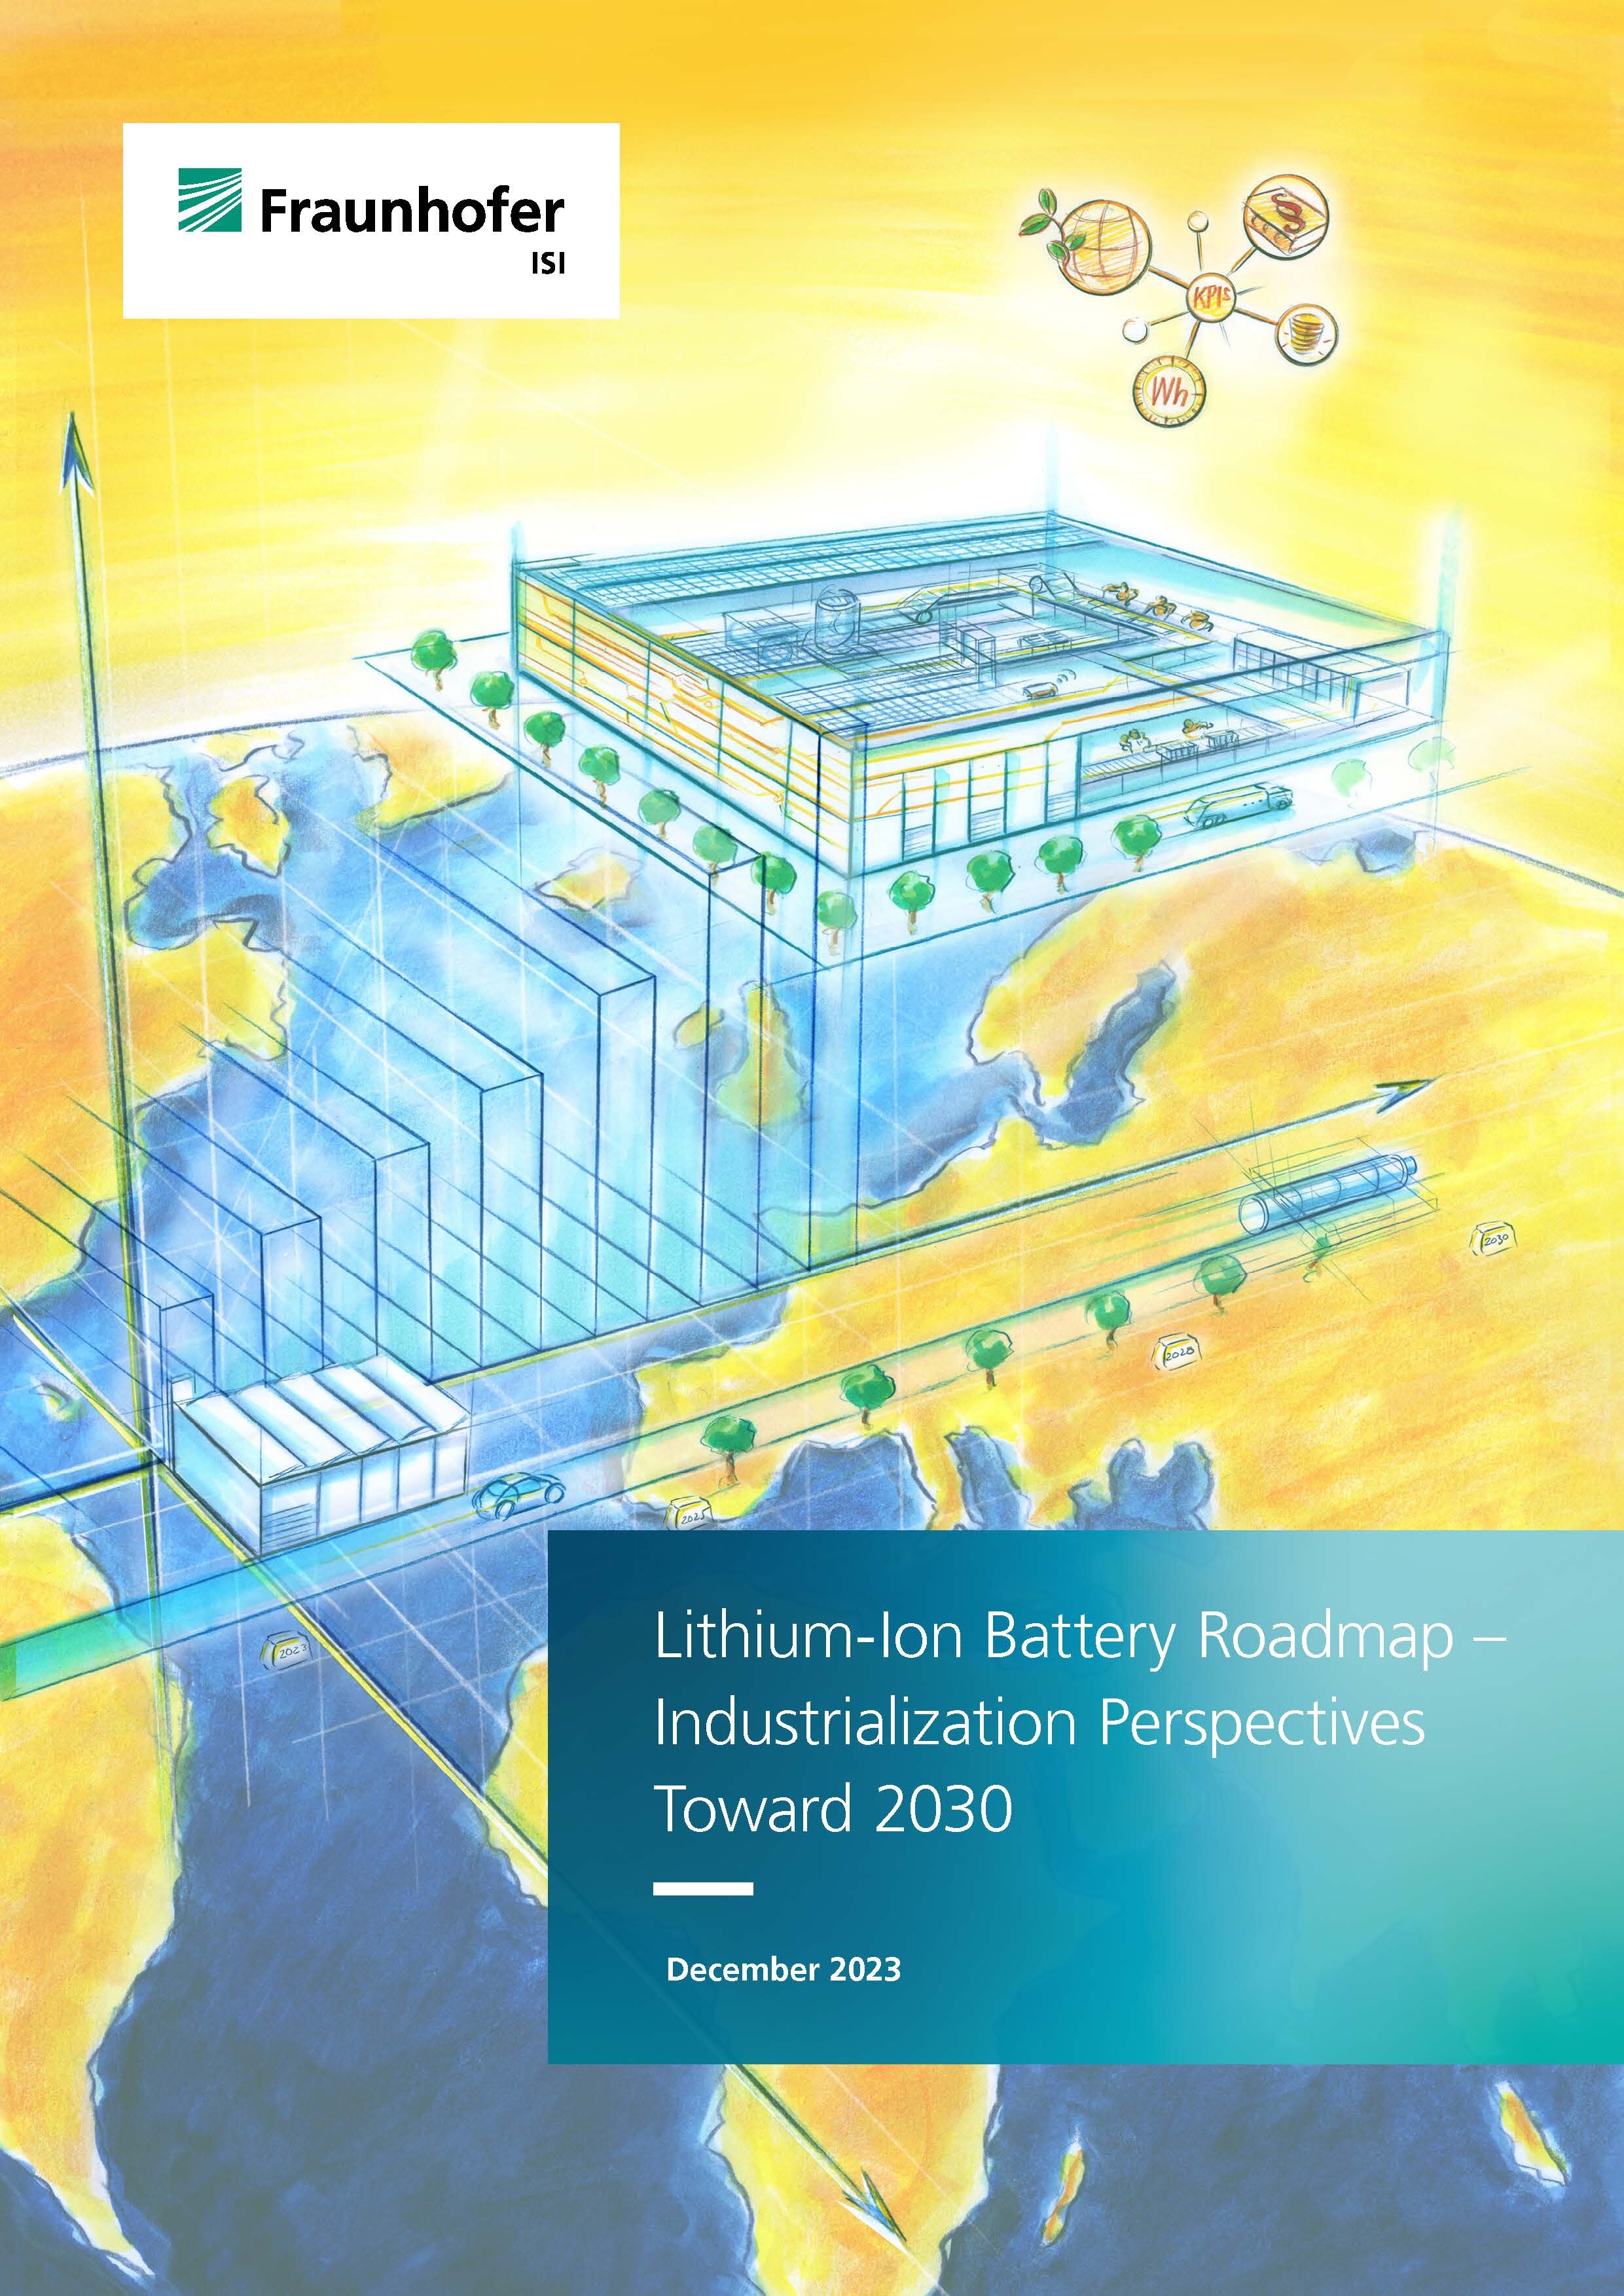 Industrialization perspectives for the lithium-ion industry